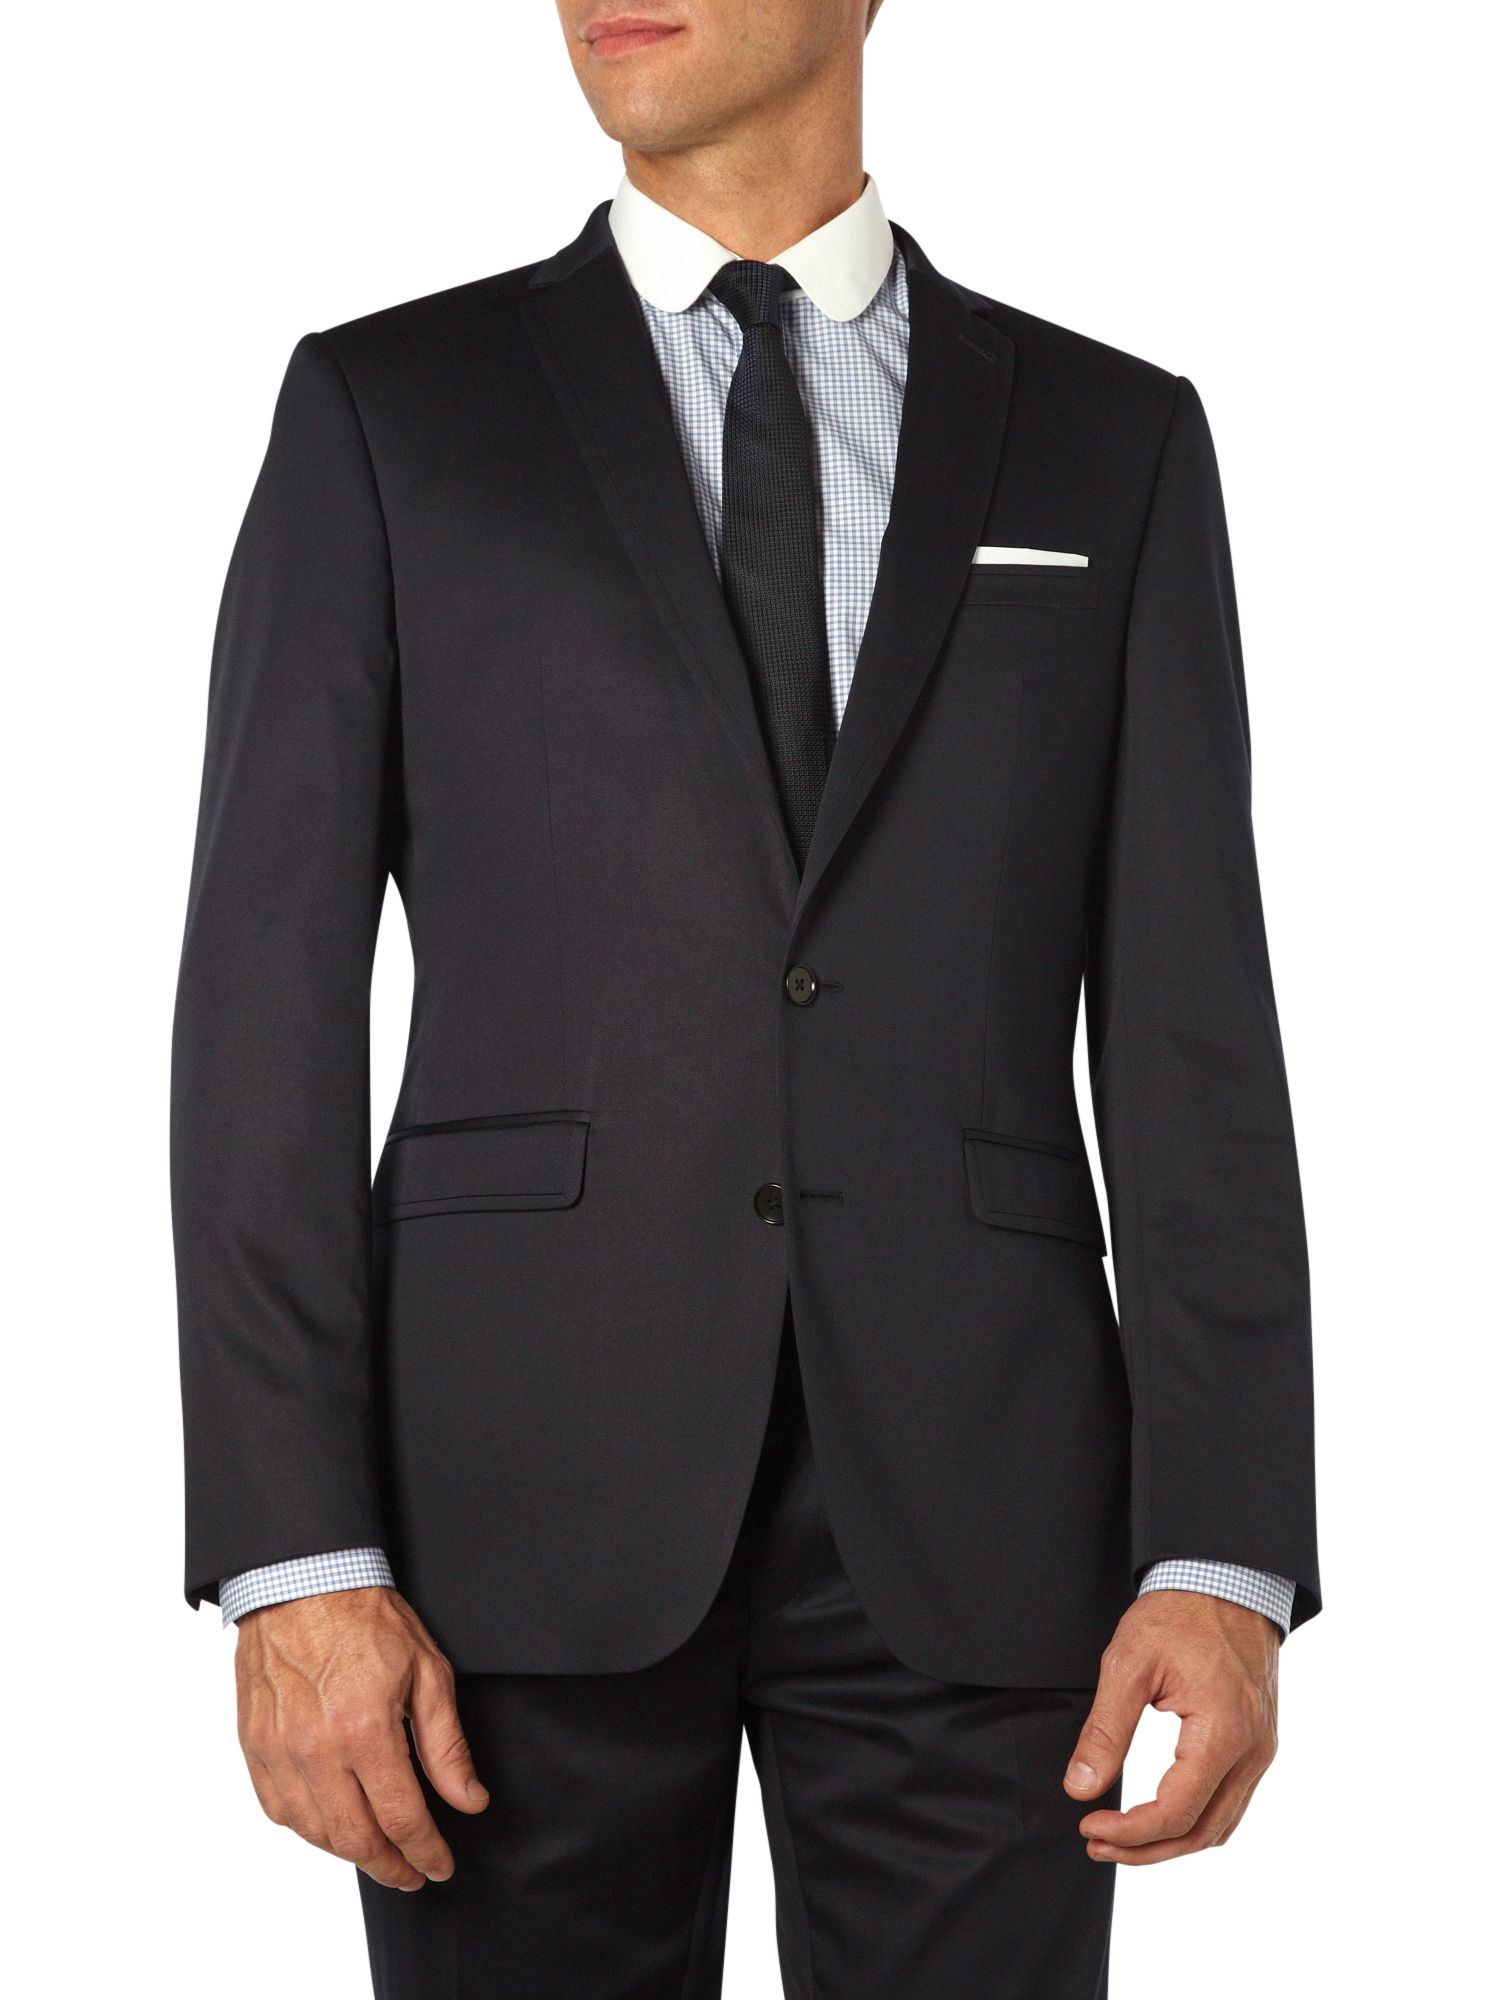 West End By Simon Carter Slim Fit Suit Jacket, Navy at John Lewis ...